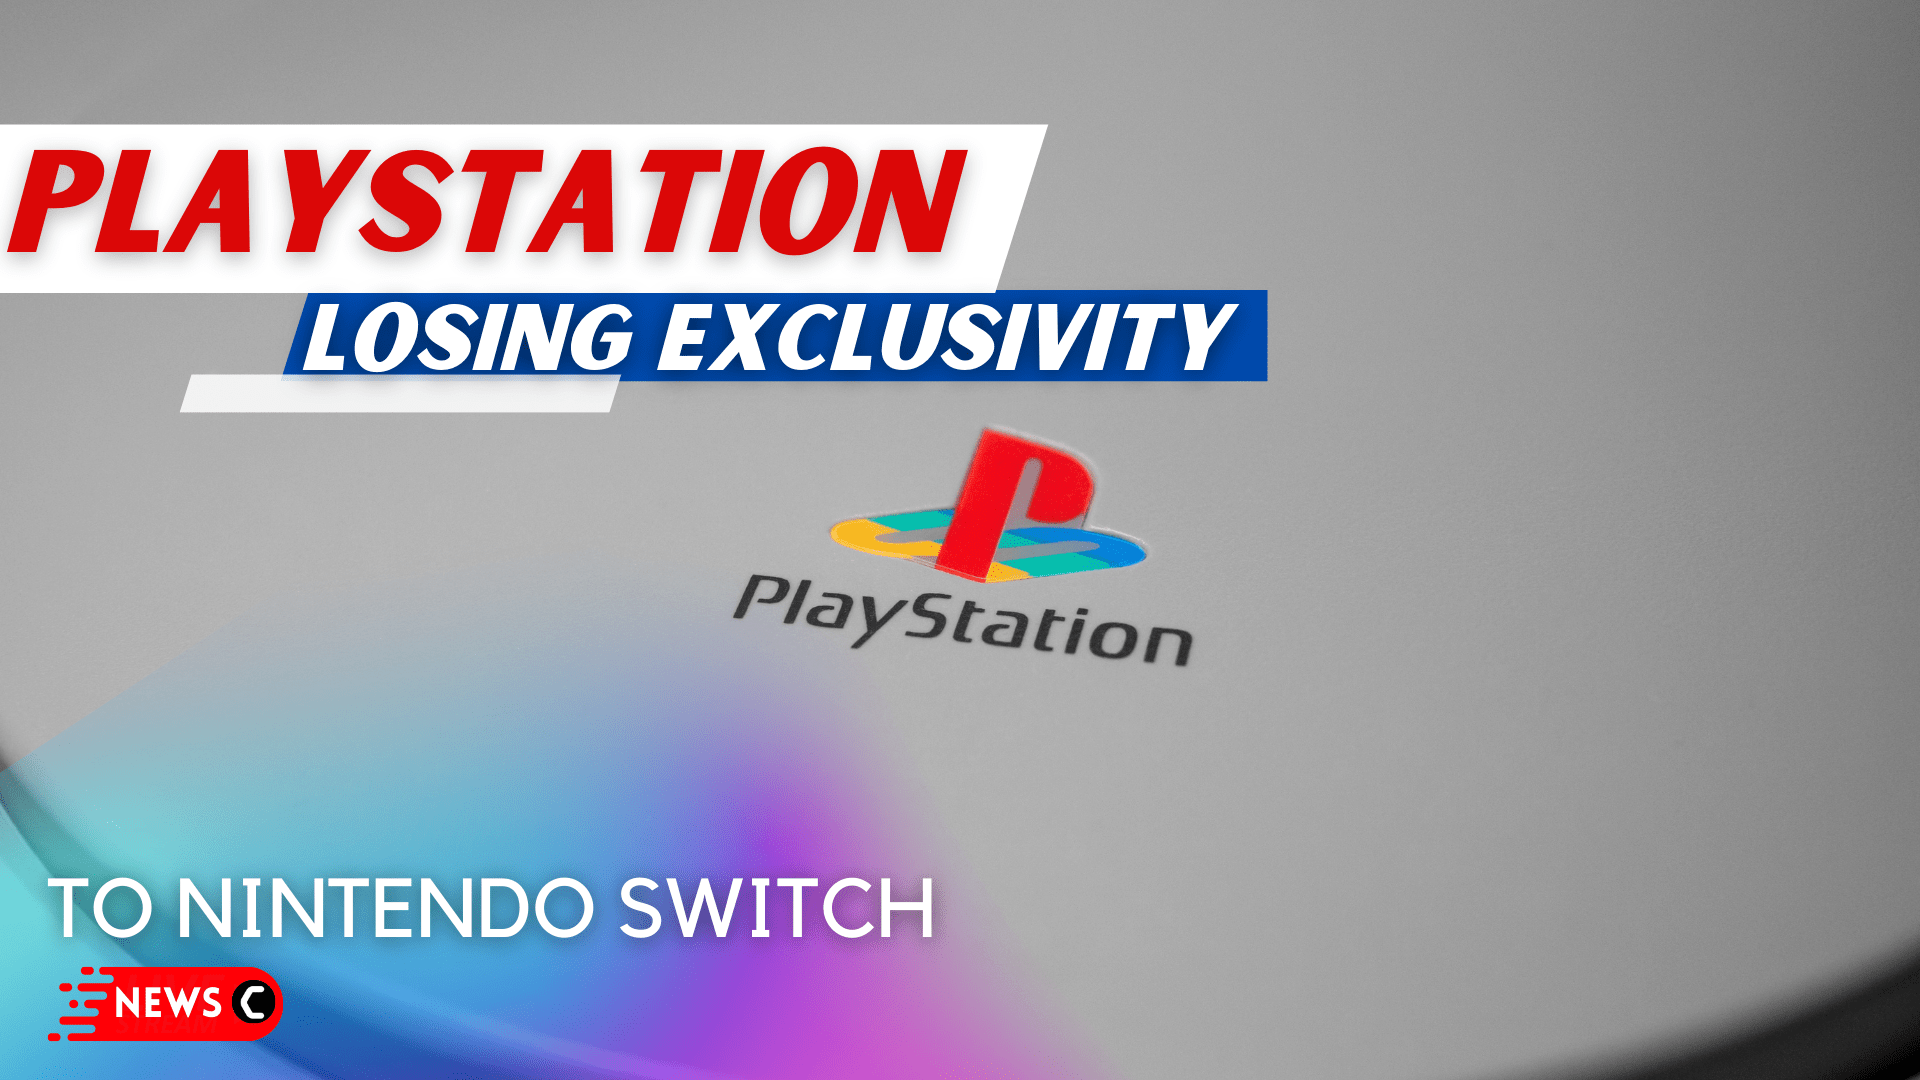 Playstation Losing Console Exclusive To Nintendo Switch Next Month